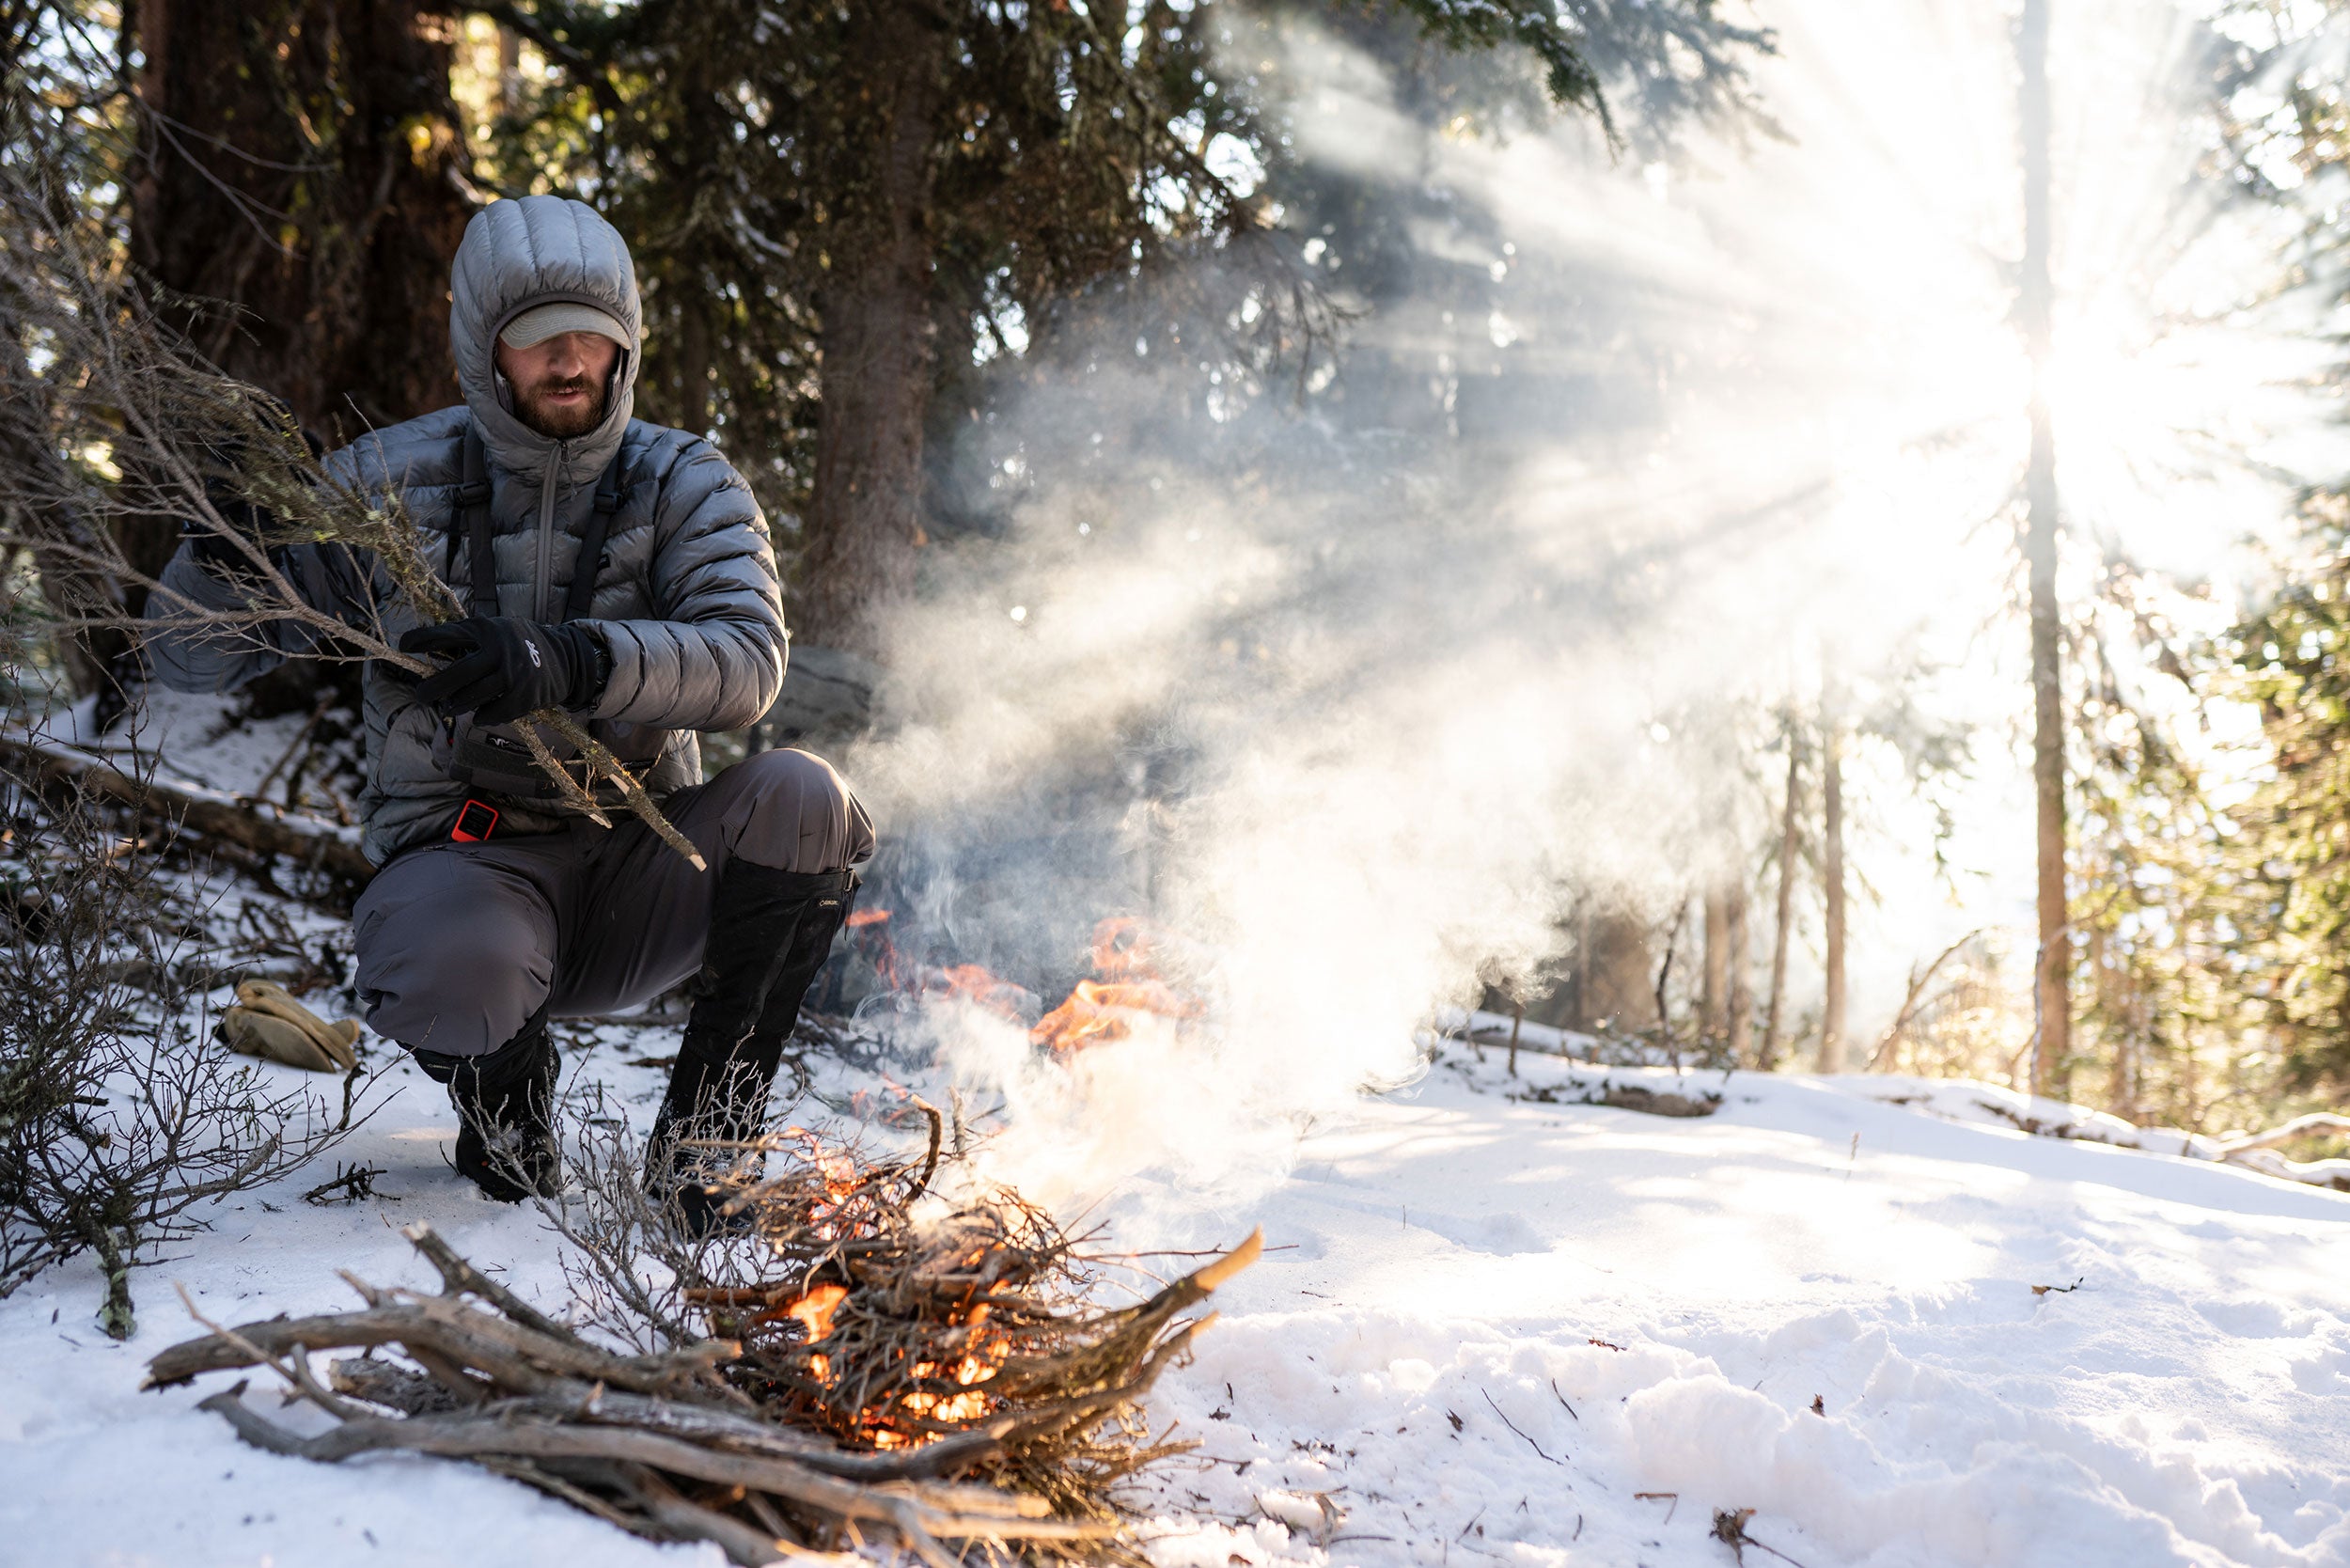 Hunter building a fire in the snow.